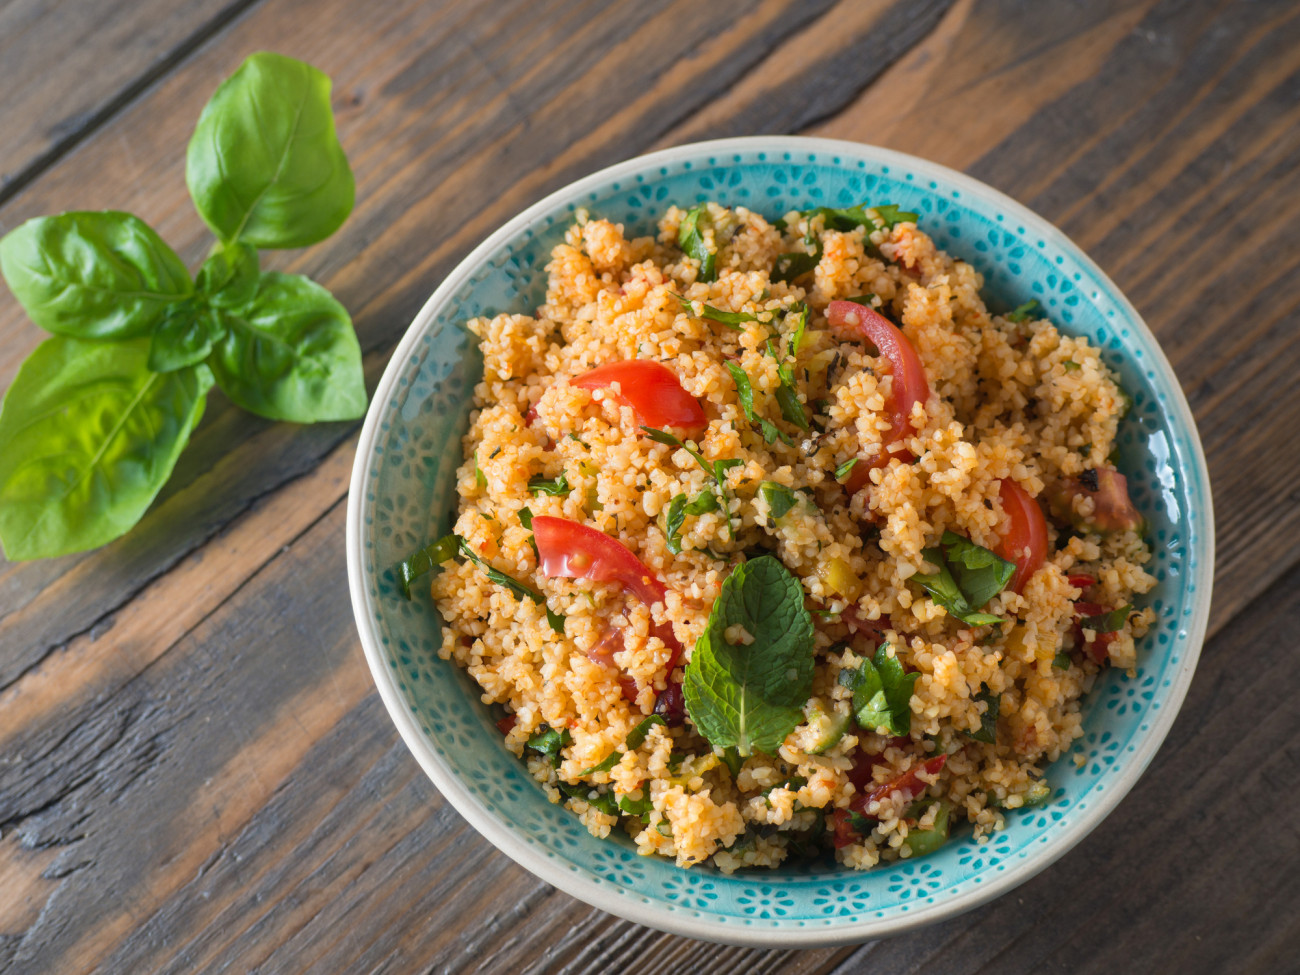 Arabic traditional cuisine - Couscous with tomato and basil from the top